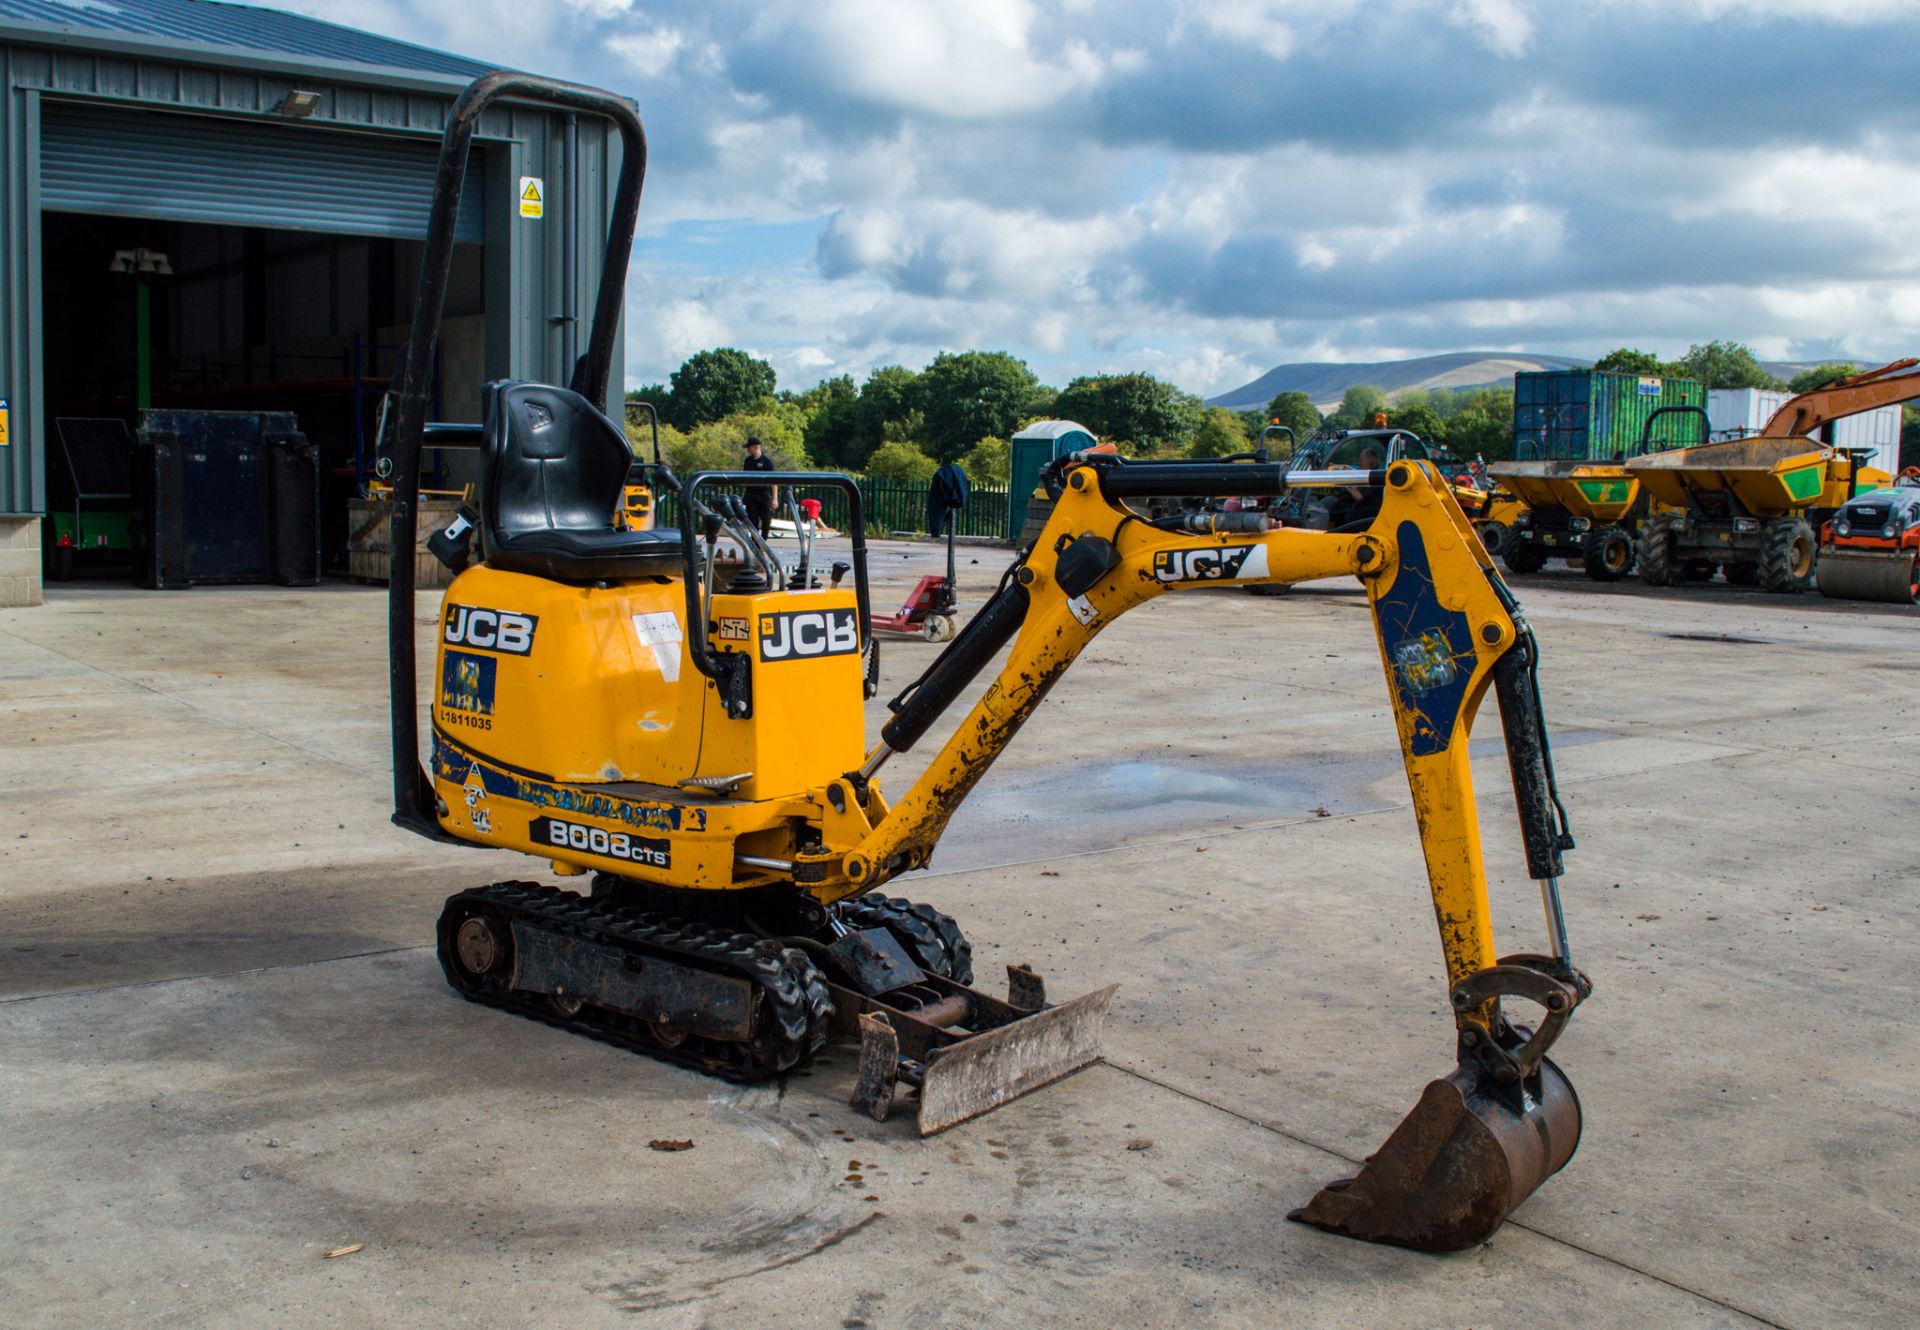 JCB 8008cts 0.8 tonne rubber tracked micro excavator Year: 2018 S/N: 749894 Recorded Hours: 980 - Image 2 of 19